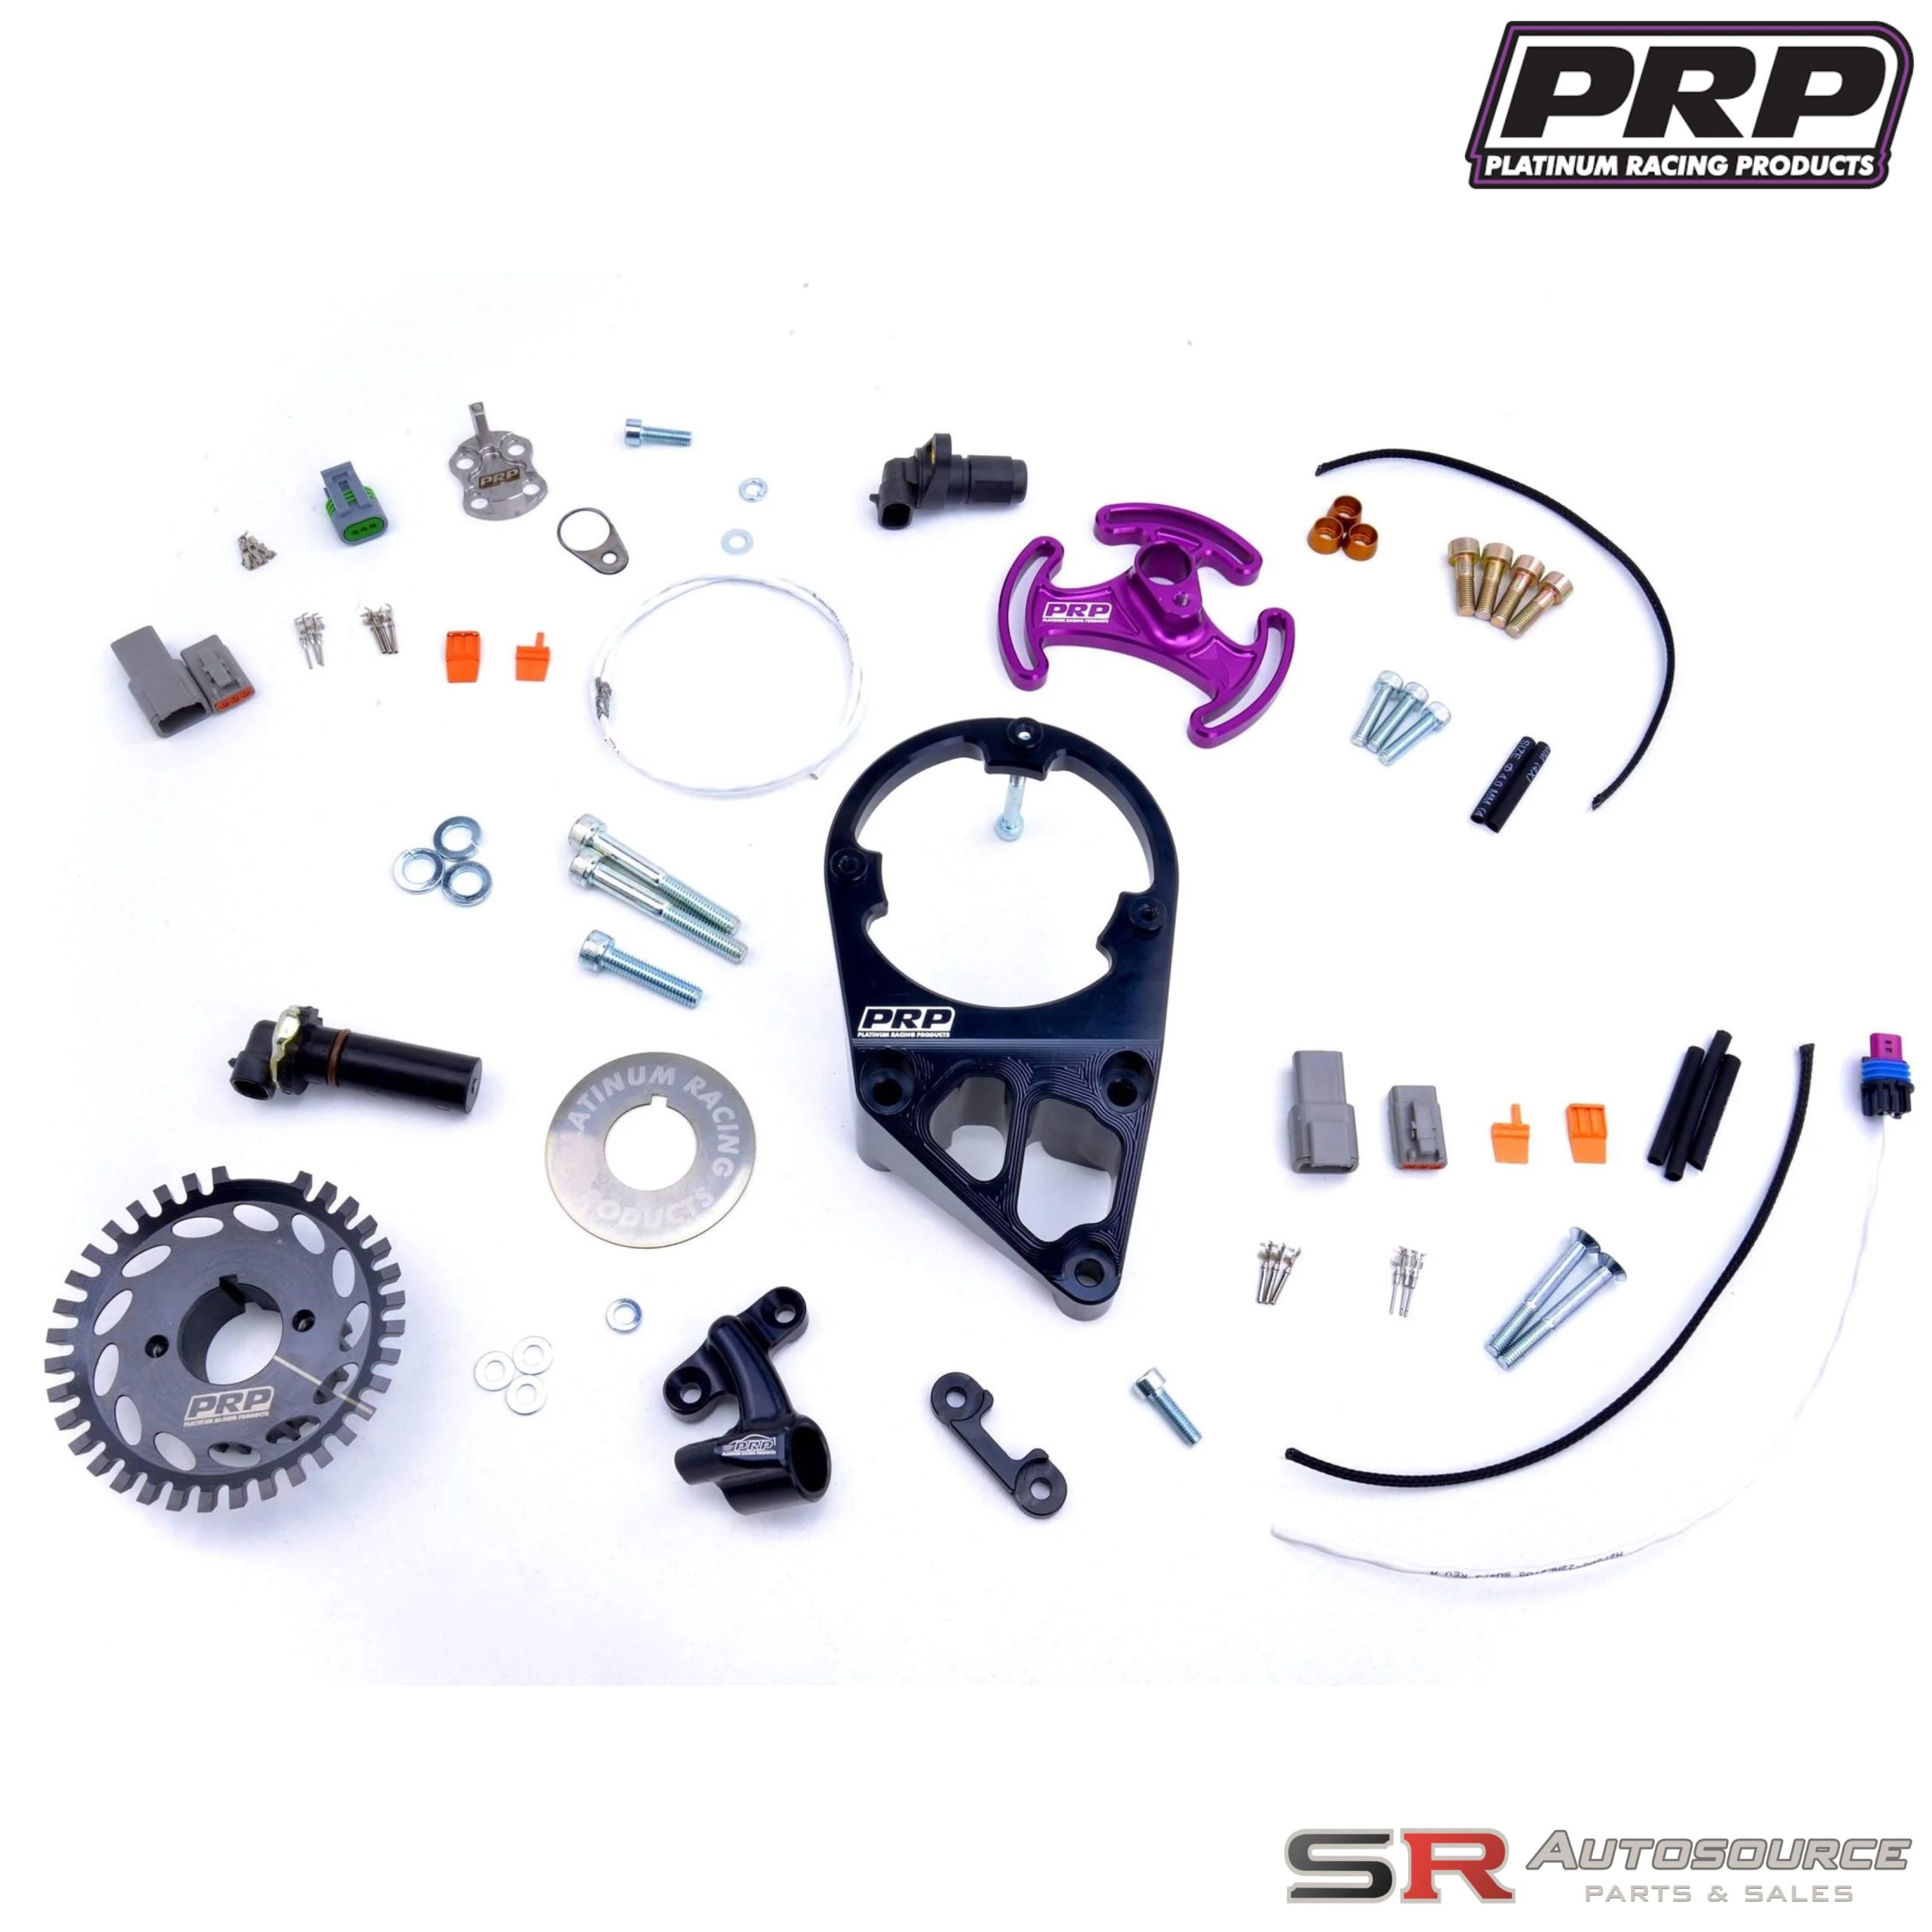 PRP Platinum Racing Products – Pro Series Trigger Kit to suit Nissan ‘RB’ Twin Cam